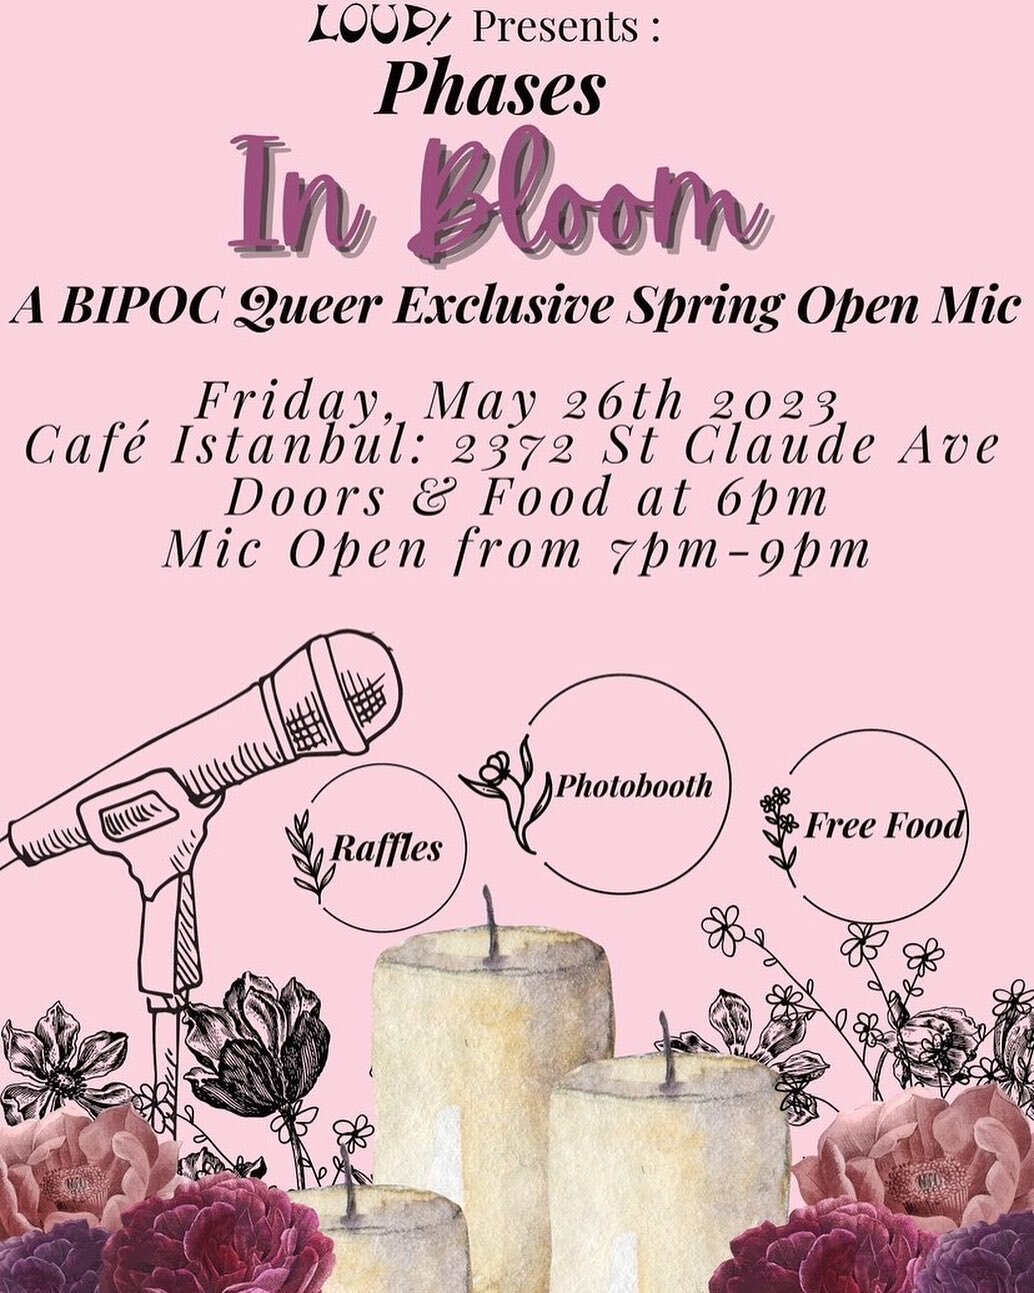 Young BIPOC, Queer, and Trans folks🗣️Where y'at???🤪🏳️&zwj;🌈🏳️&zwj;⚧️
&bull;
Do you like free food and giveaways? Have you been looking to build community? Do you want a chance to offer up your art? Look no further, we got us!🌈🌸
&bull;
Pull up 